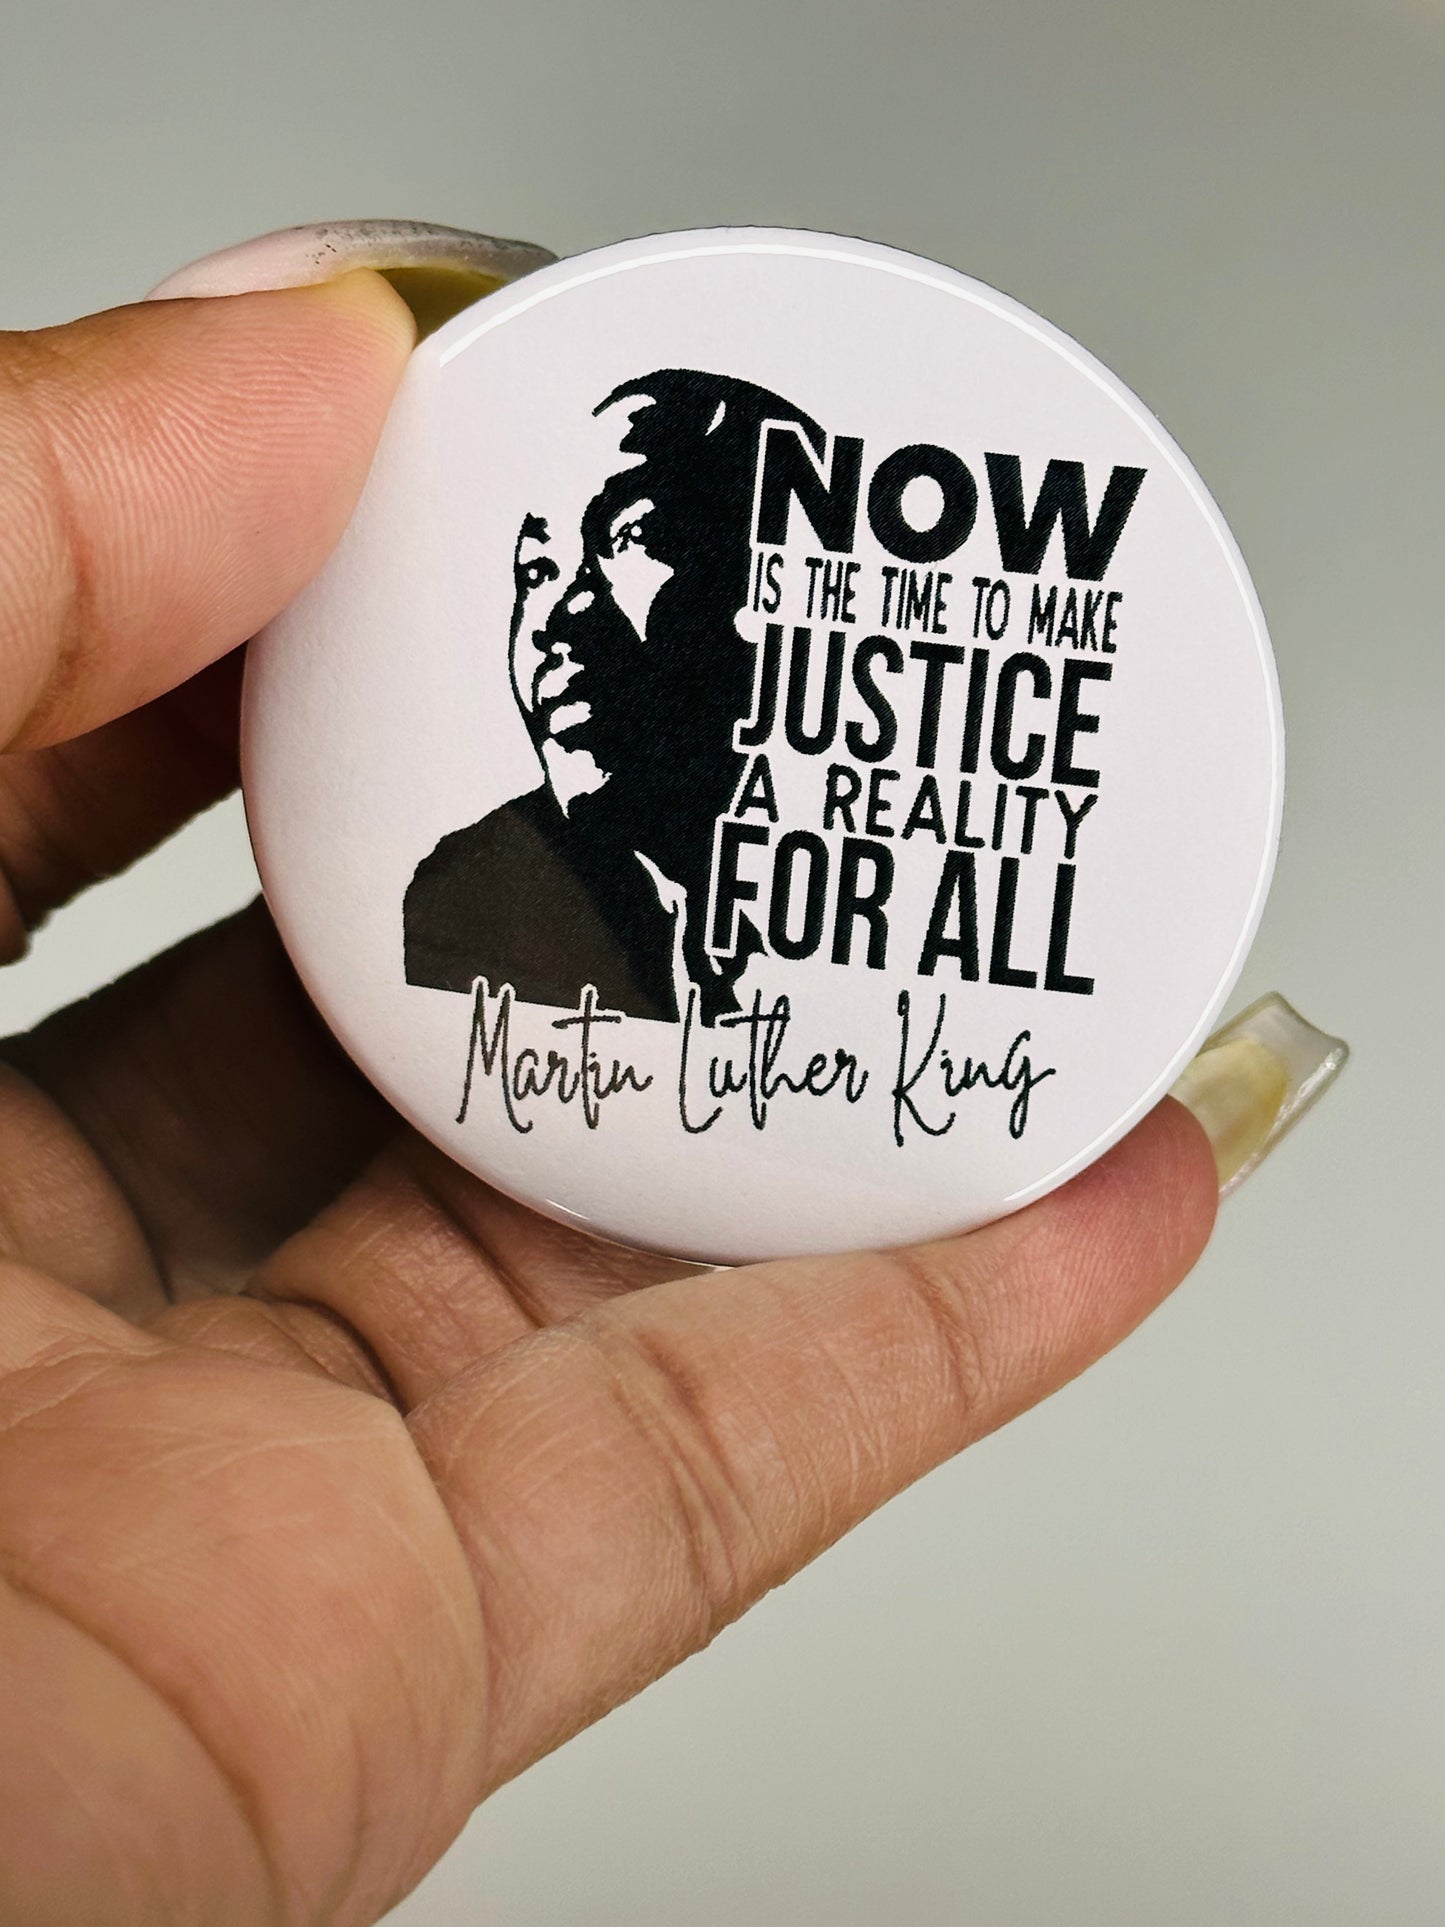 Black History Themed Pinback Buttons